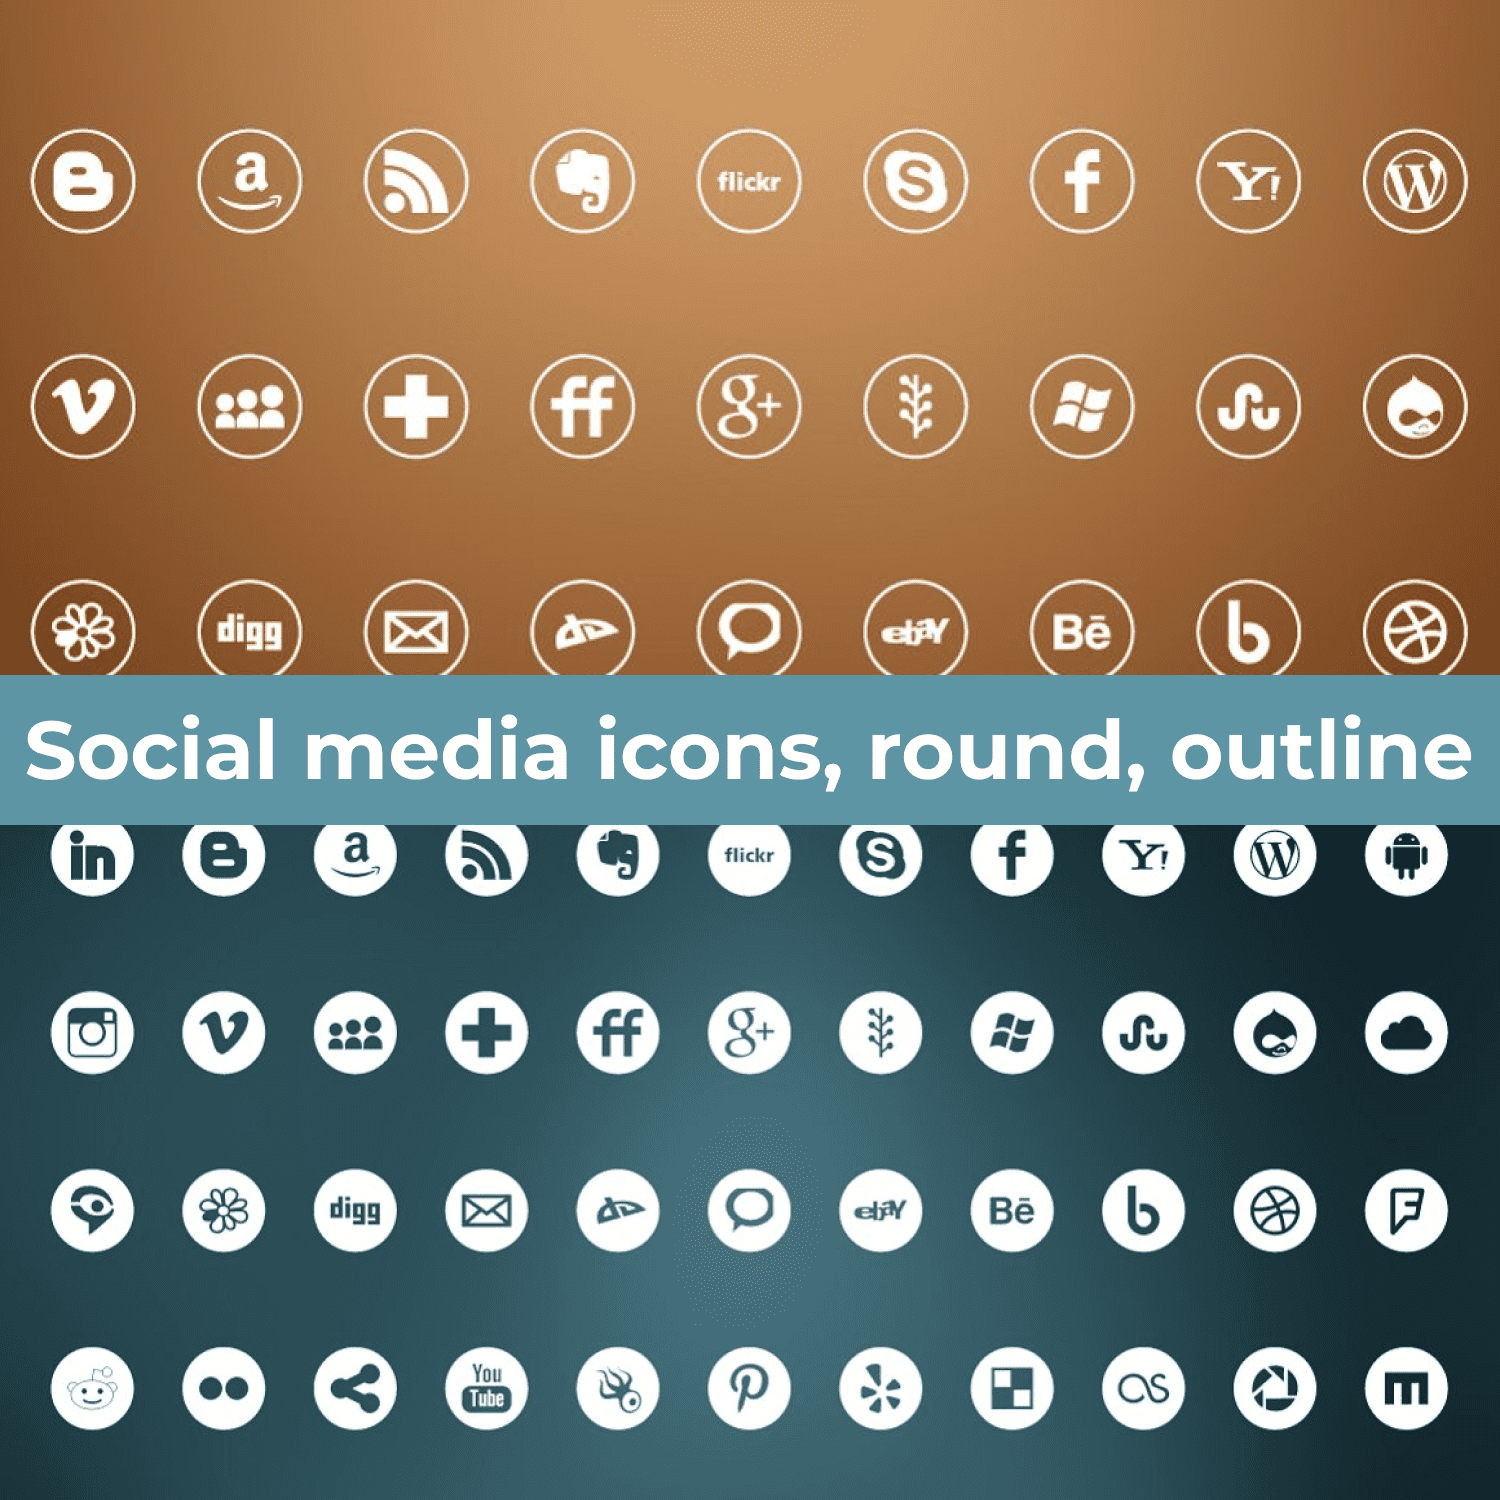 Social media icons, round, outline cover image.